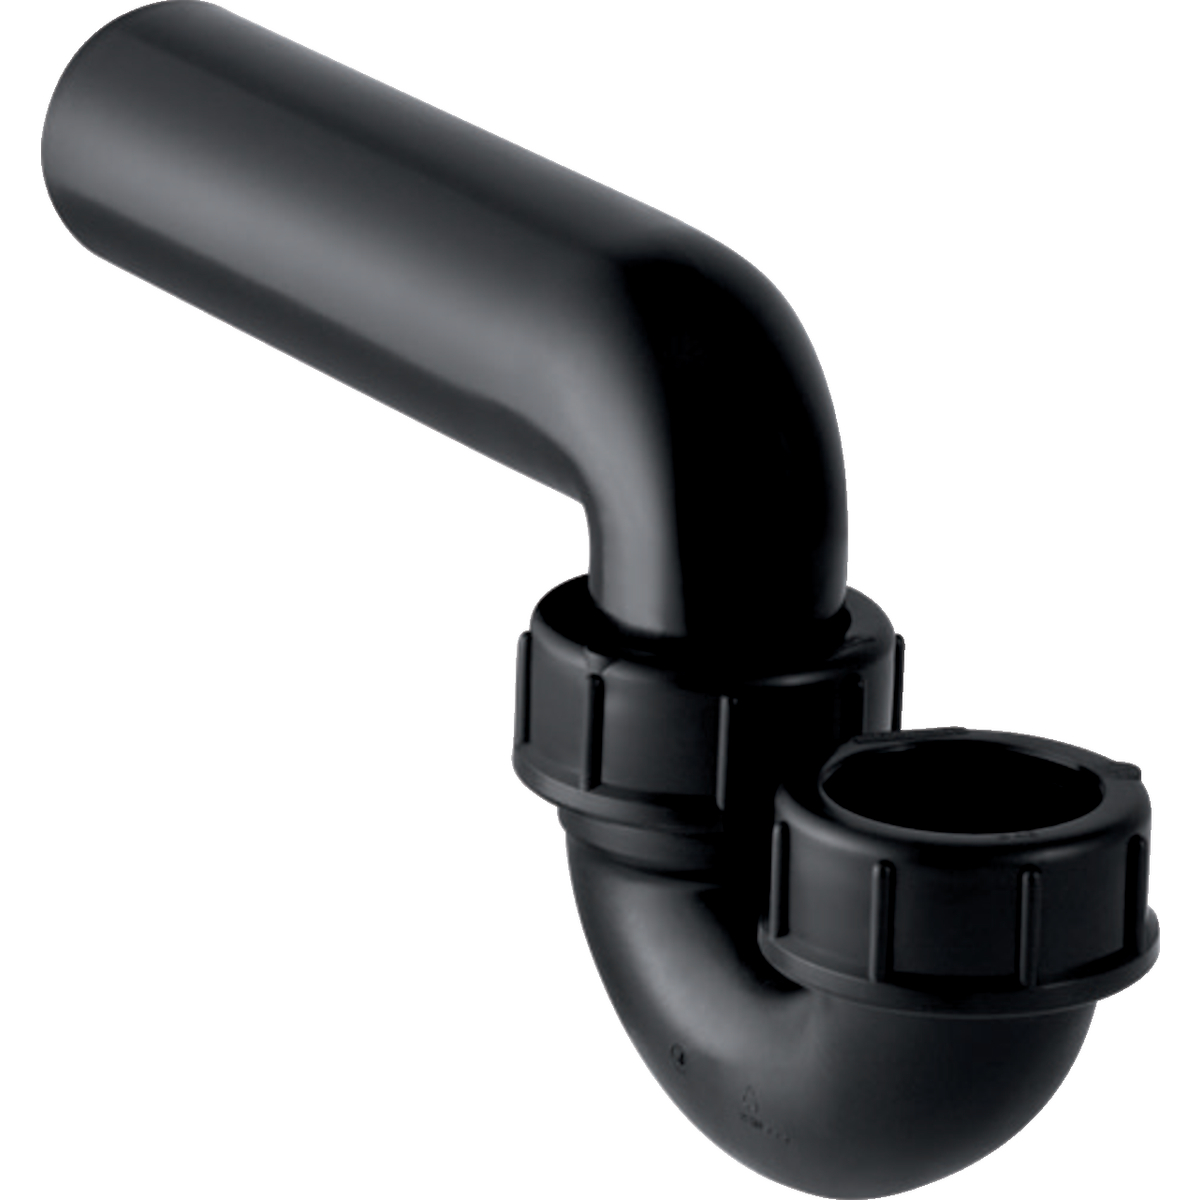 Geberit 152.044.16.1 P-Trap for Sink, with Compression Joint, Vertical Inlet and Horizontal Outlet: D=56Mm, D1=56Mm - Black